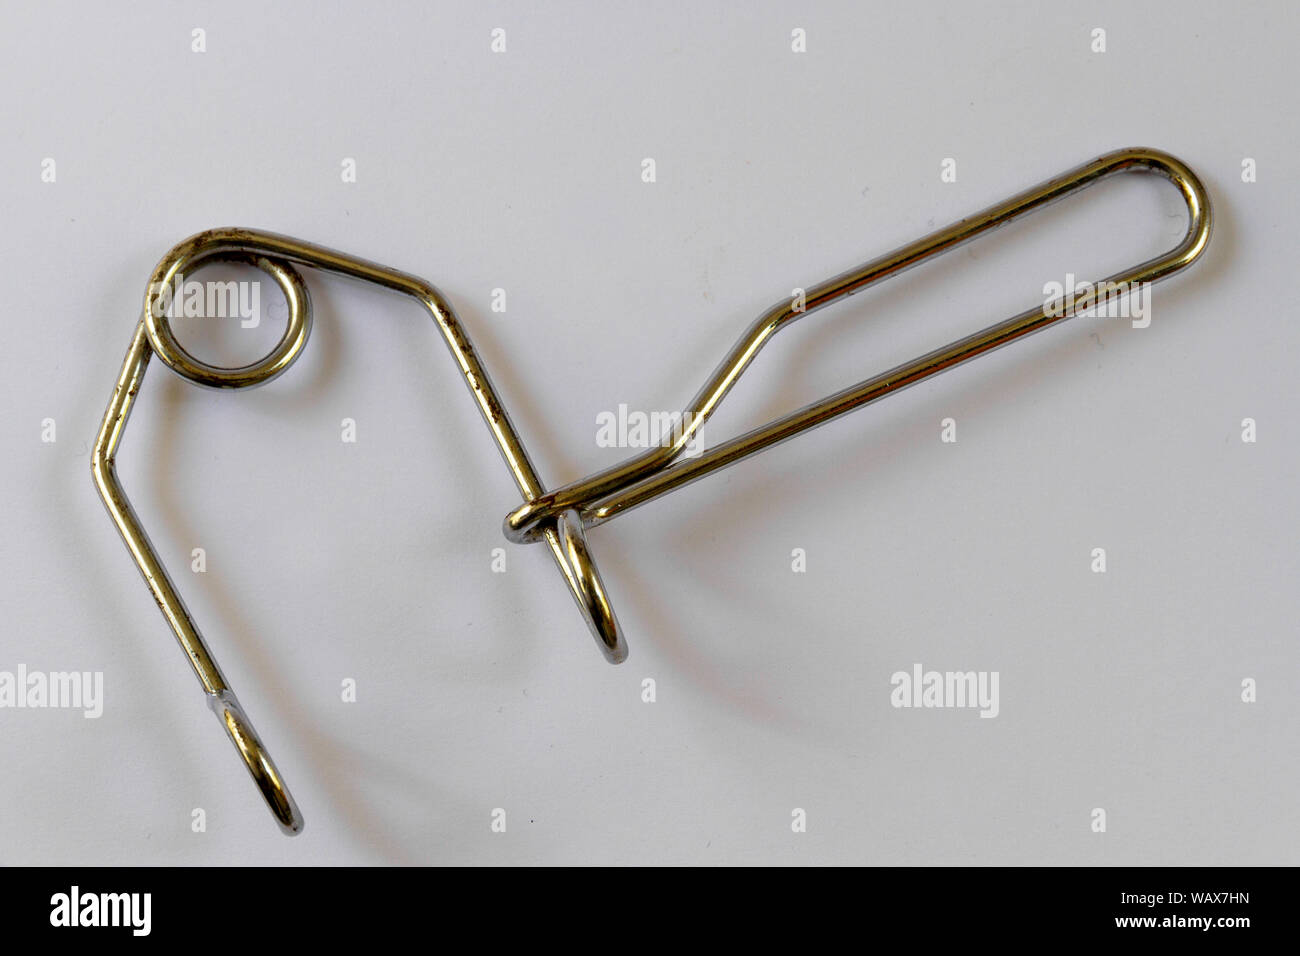 Overhead view of a wire third hand tool used to pull bicycle brakes together in order to adjust them, isolated on a plain background Stock Photo